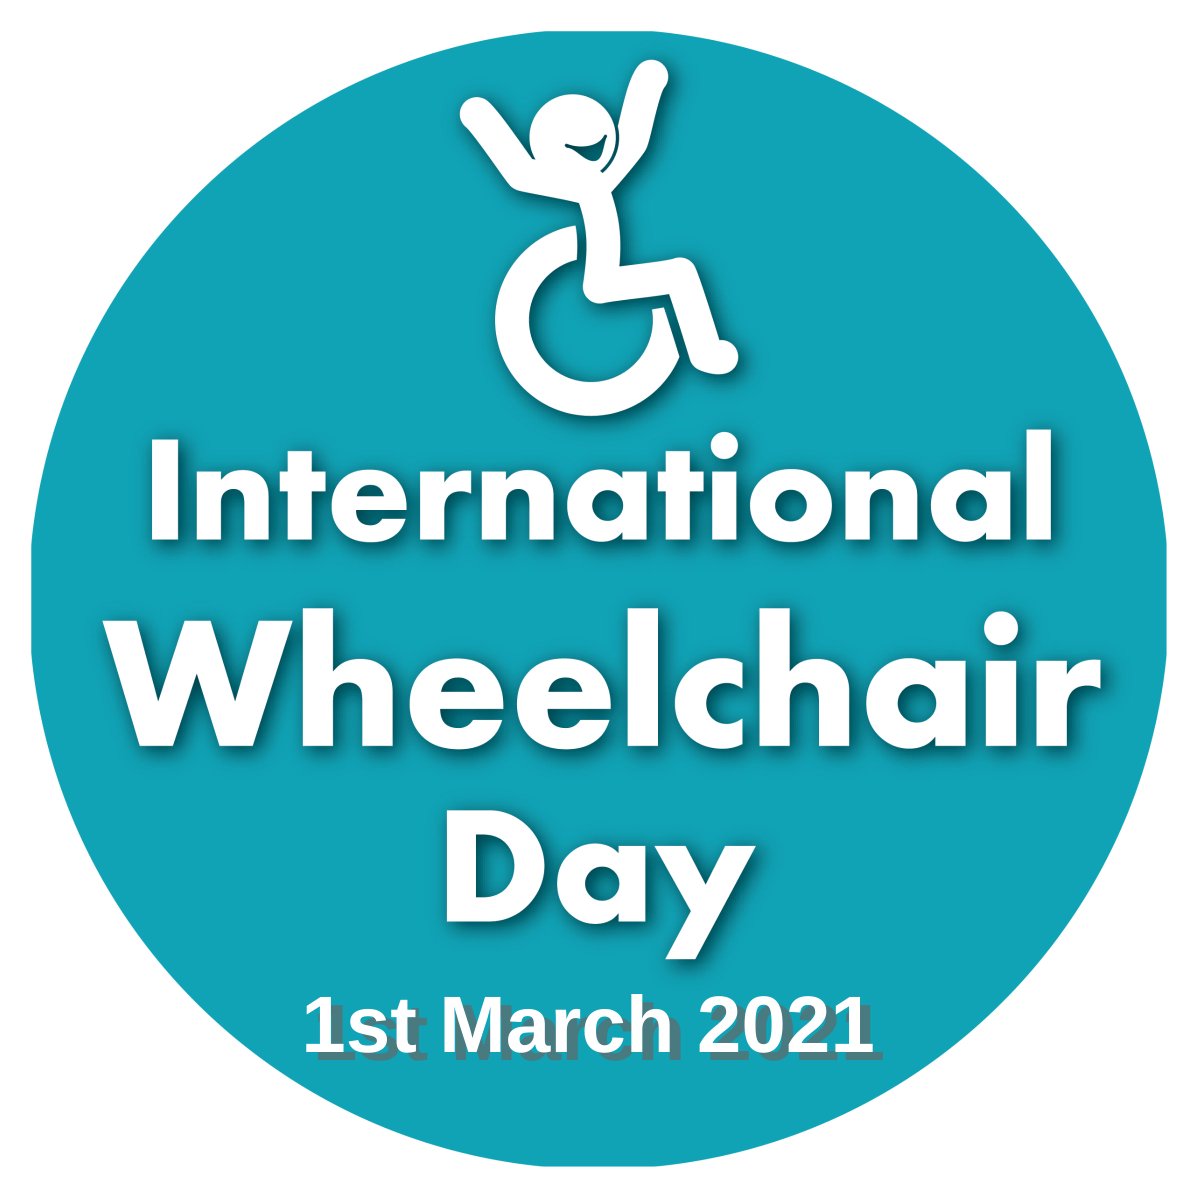 Today is March 1st - International Wheelchair Day👩‍🦼👩‍🦽👨‍🦽. Wheelchair is an integral assistive device to improve quality of life of people who use wheelchairs. Hence, it is imperative to ensure wheelchair accessibility environment. #IWD #accessibility #assistivedevices